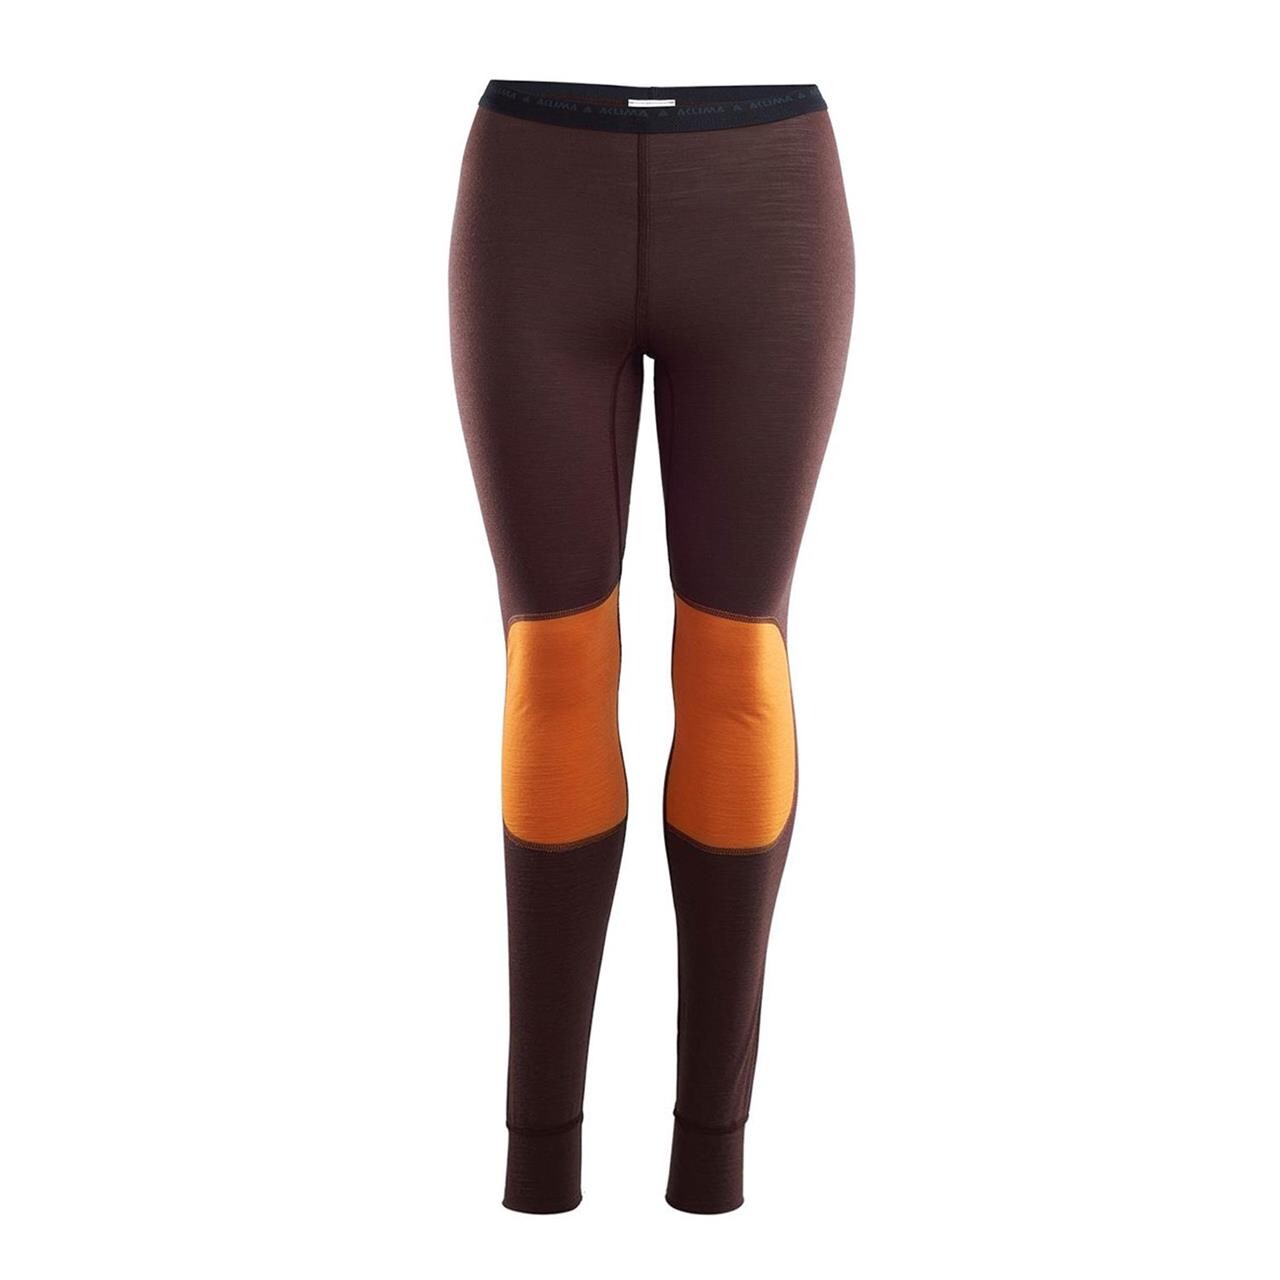 Aclima Womens Reinforced Long Pants  (Brun (CHOCOLATE/ORANGE POPSICLE) Small)